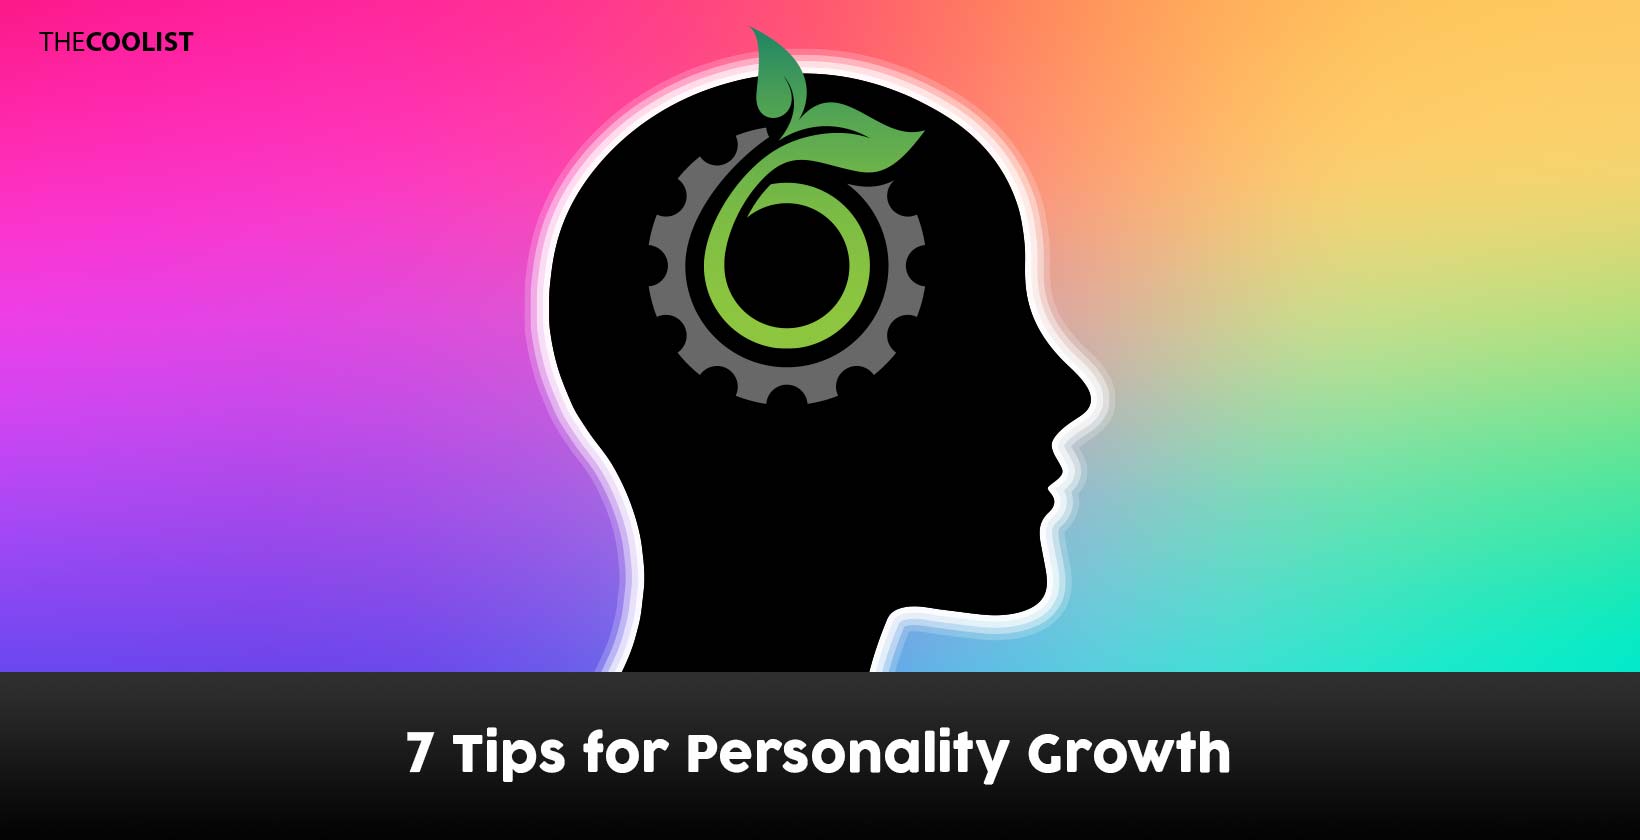 Seven tips for helping positive personality growth